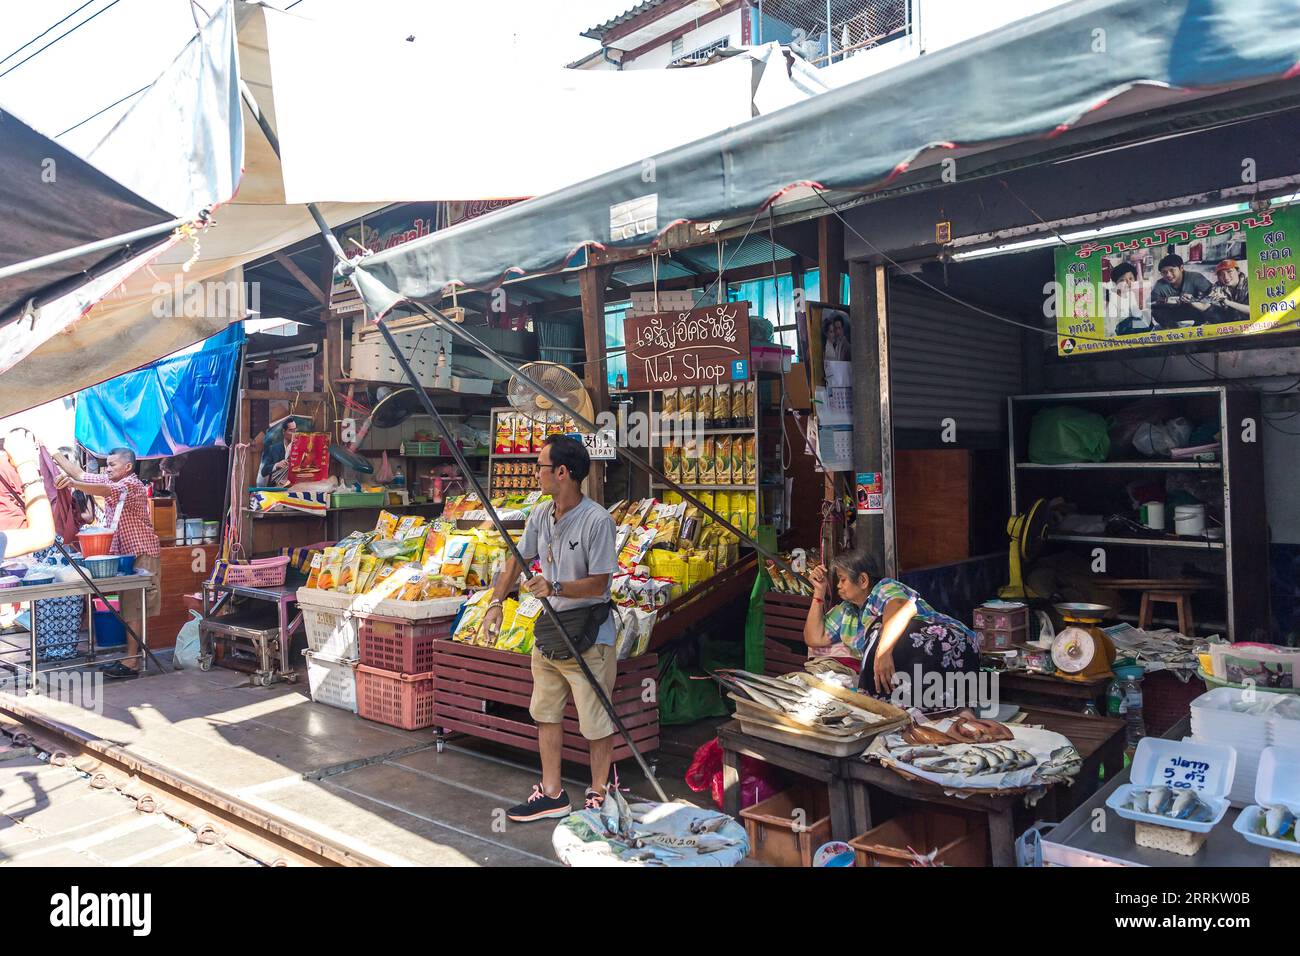 Vendors move their wares and catch up with awnings when a train arrives, selling food on rails, Maeklong Railway market, Talad Rom Hub railroad market, near Bangkok, Samut Songkhram, Thailand, Asia Stock Photo